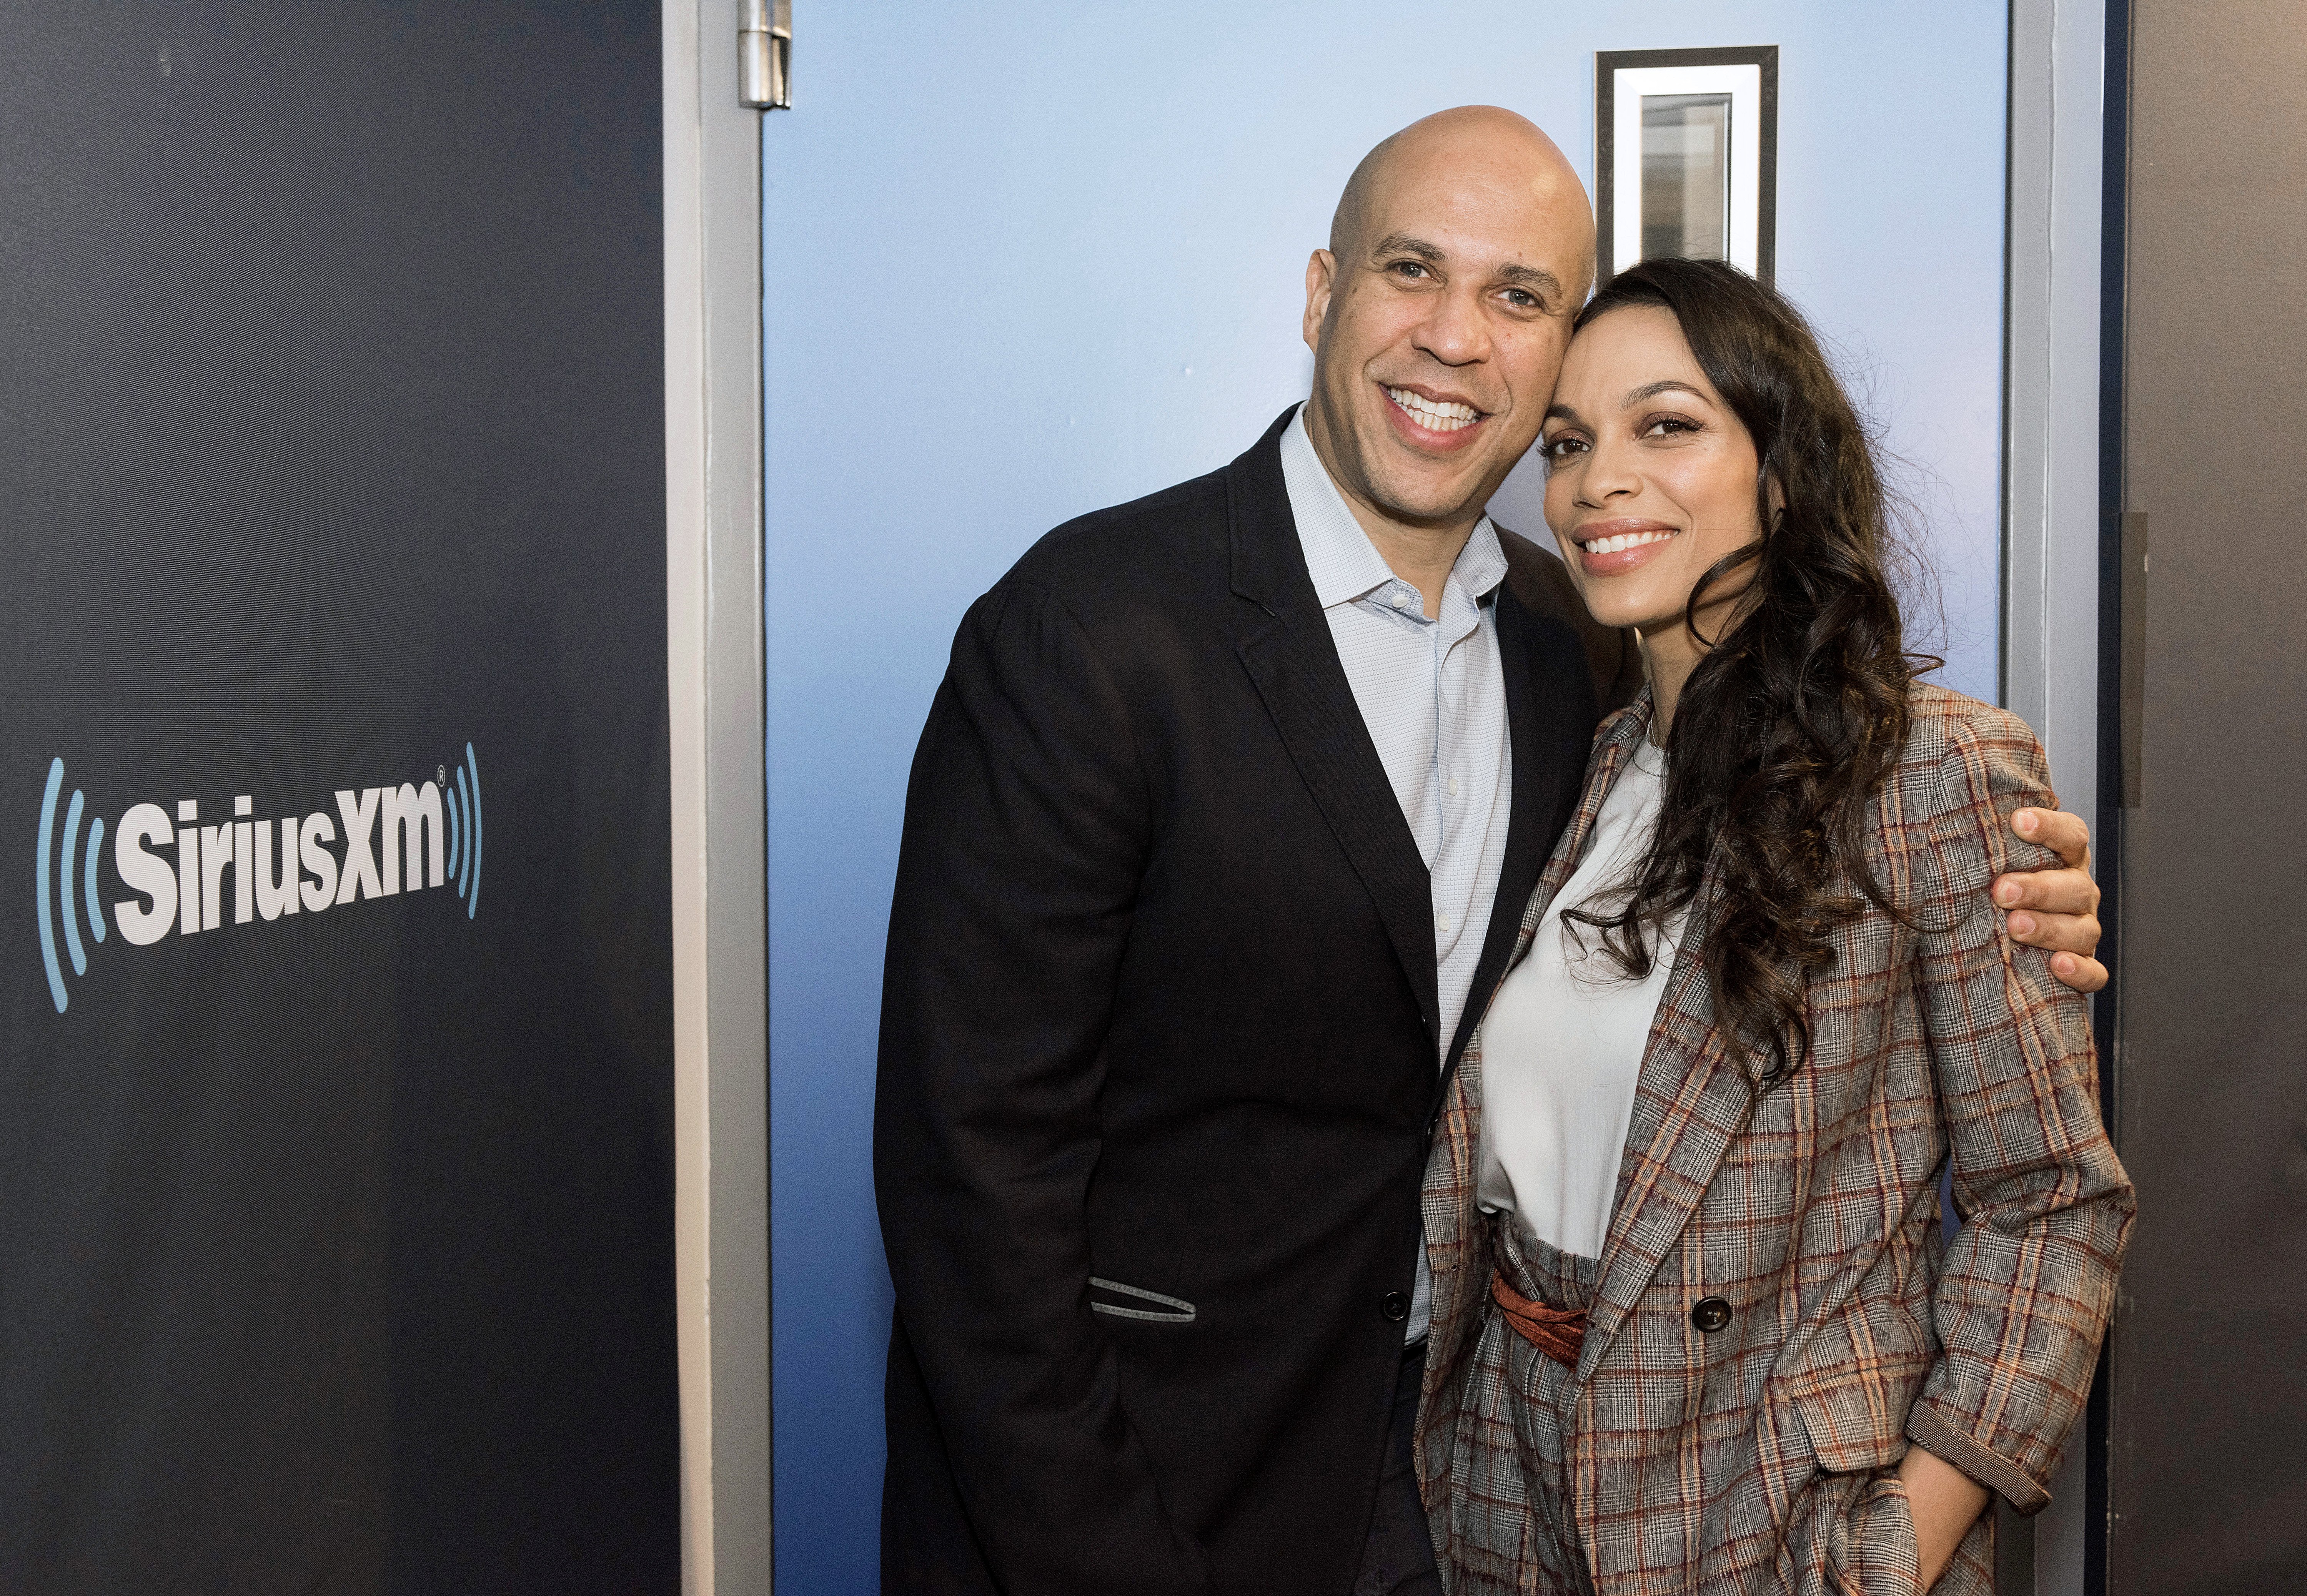 US Senator Cory Booker and his girlfriend actress Rosario Dawson visit SiriusXM Studios on February 7, 2020 in New York City ┃Source: Getty Images